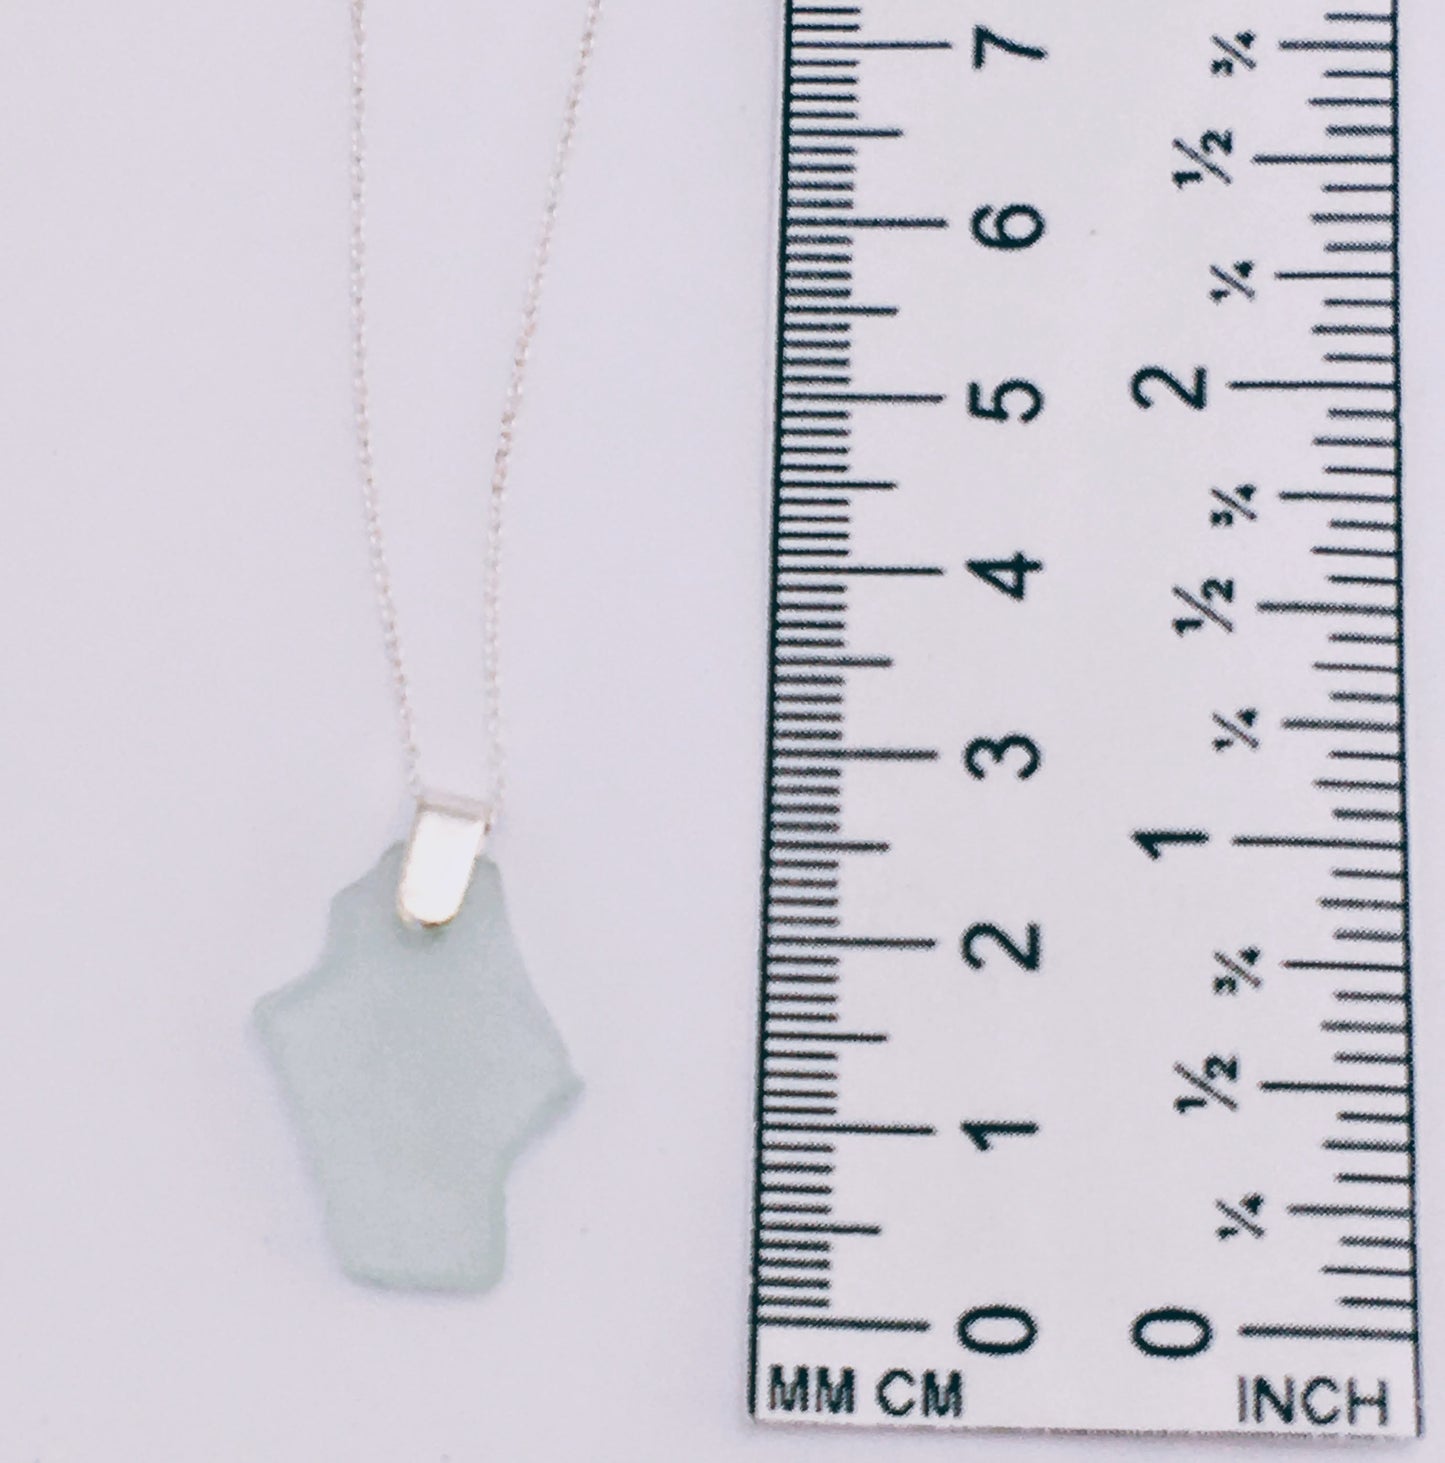 Shoreline Pendant - Pale aqua sea glass from the South shore of Nova Scotia, Canada with narrow smooth Sterling silver bail , on a chain